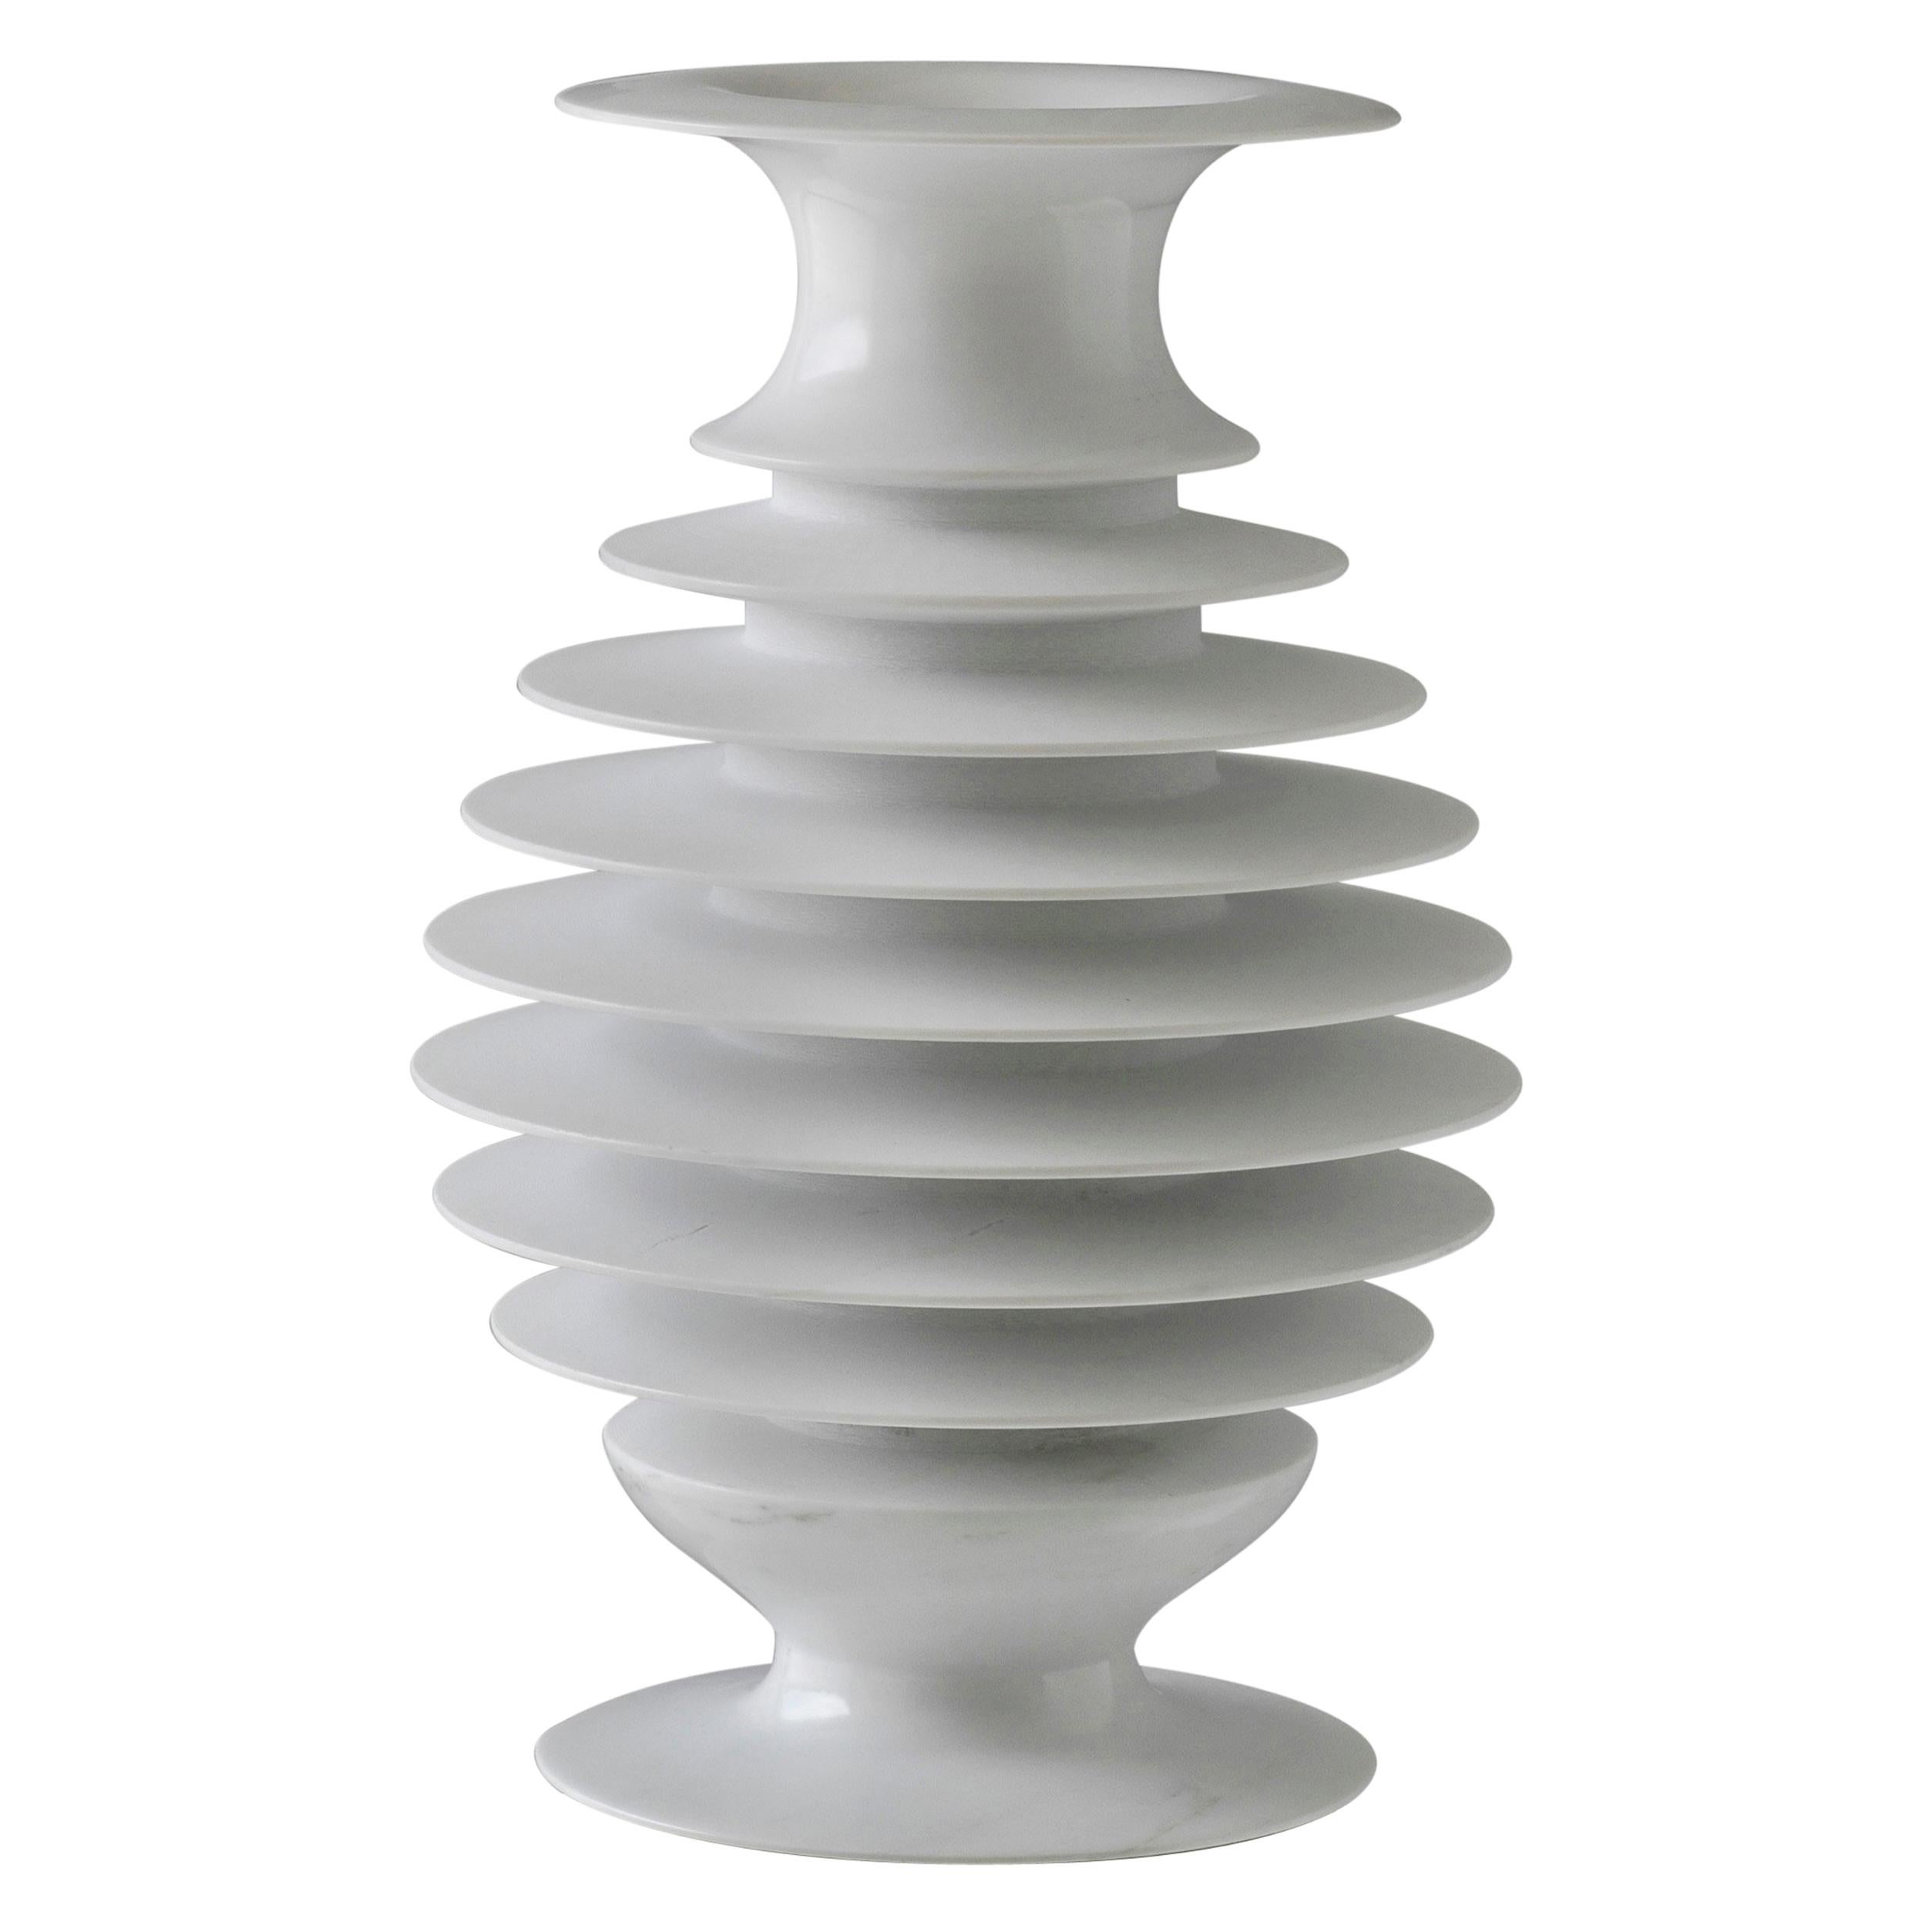 Ittio Vase in Bianca Carra Marble by Kreoo For Sale